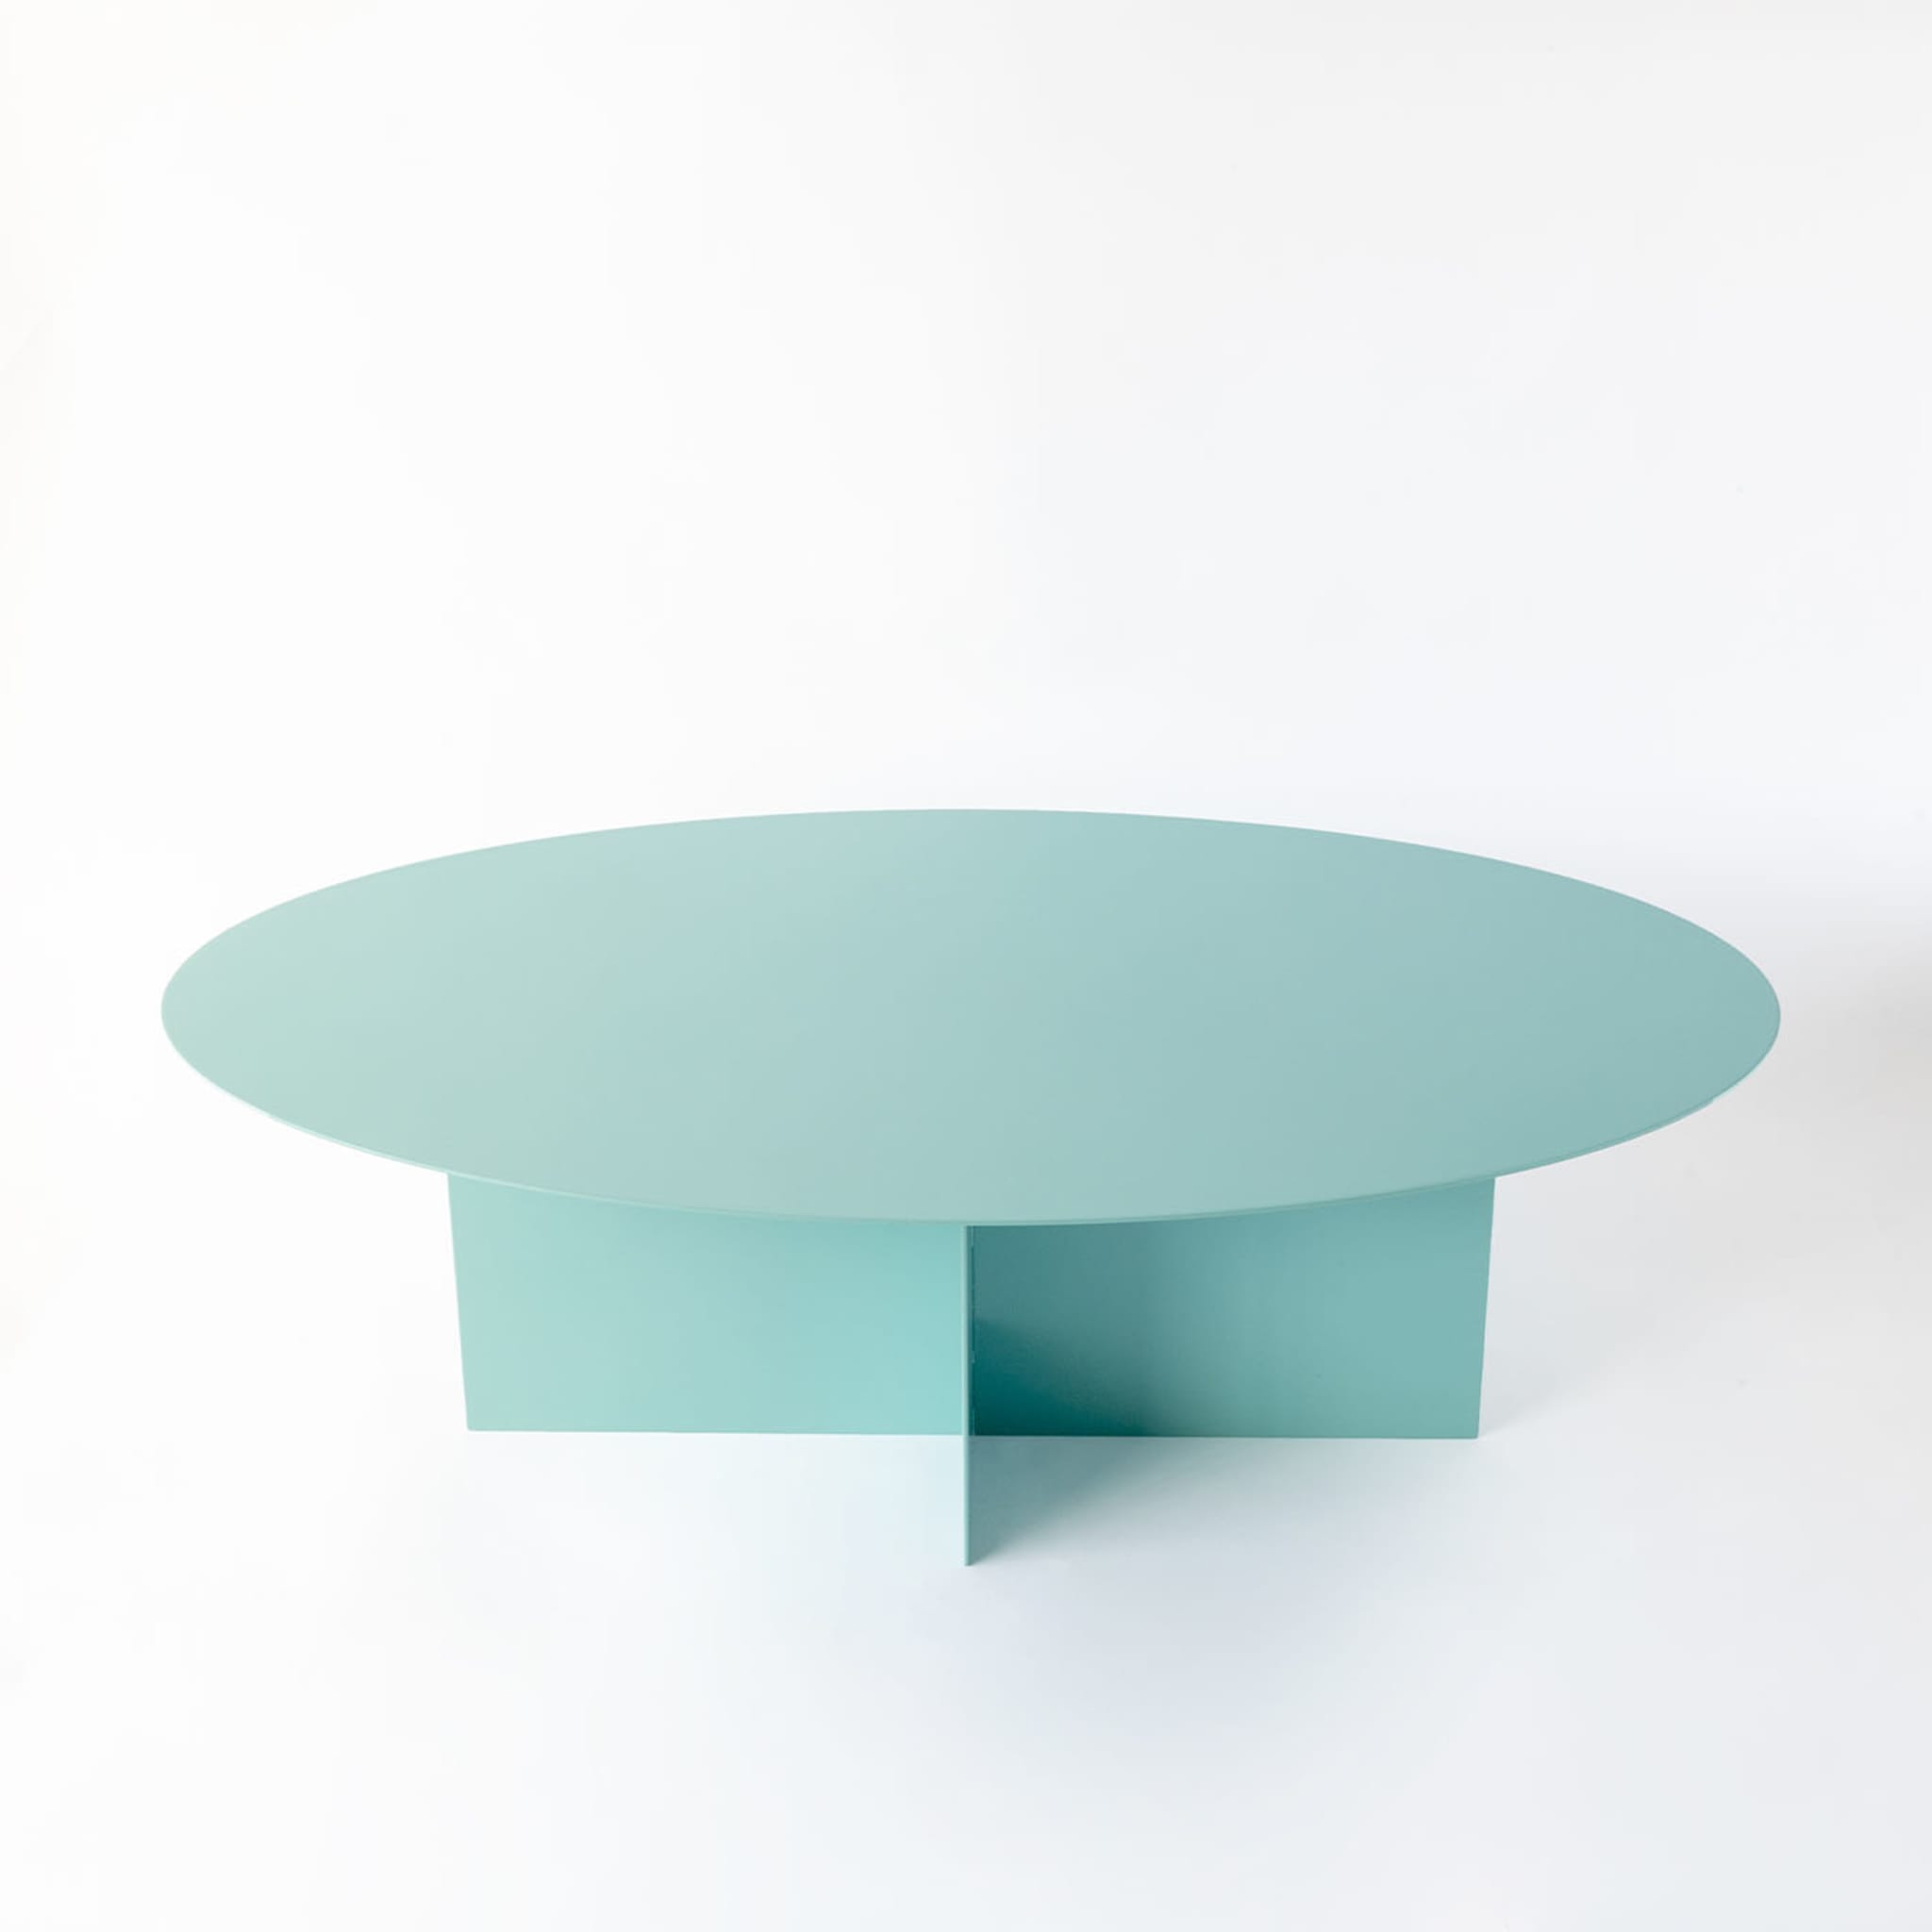 Across Oval Coffe Table Elliptical by Claudia Pignatale - Alternative view 1